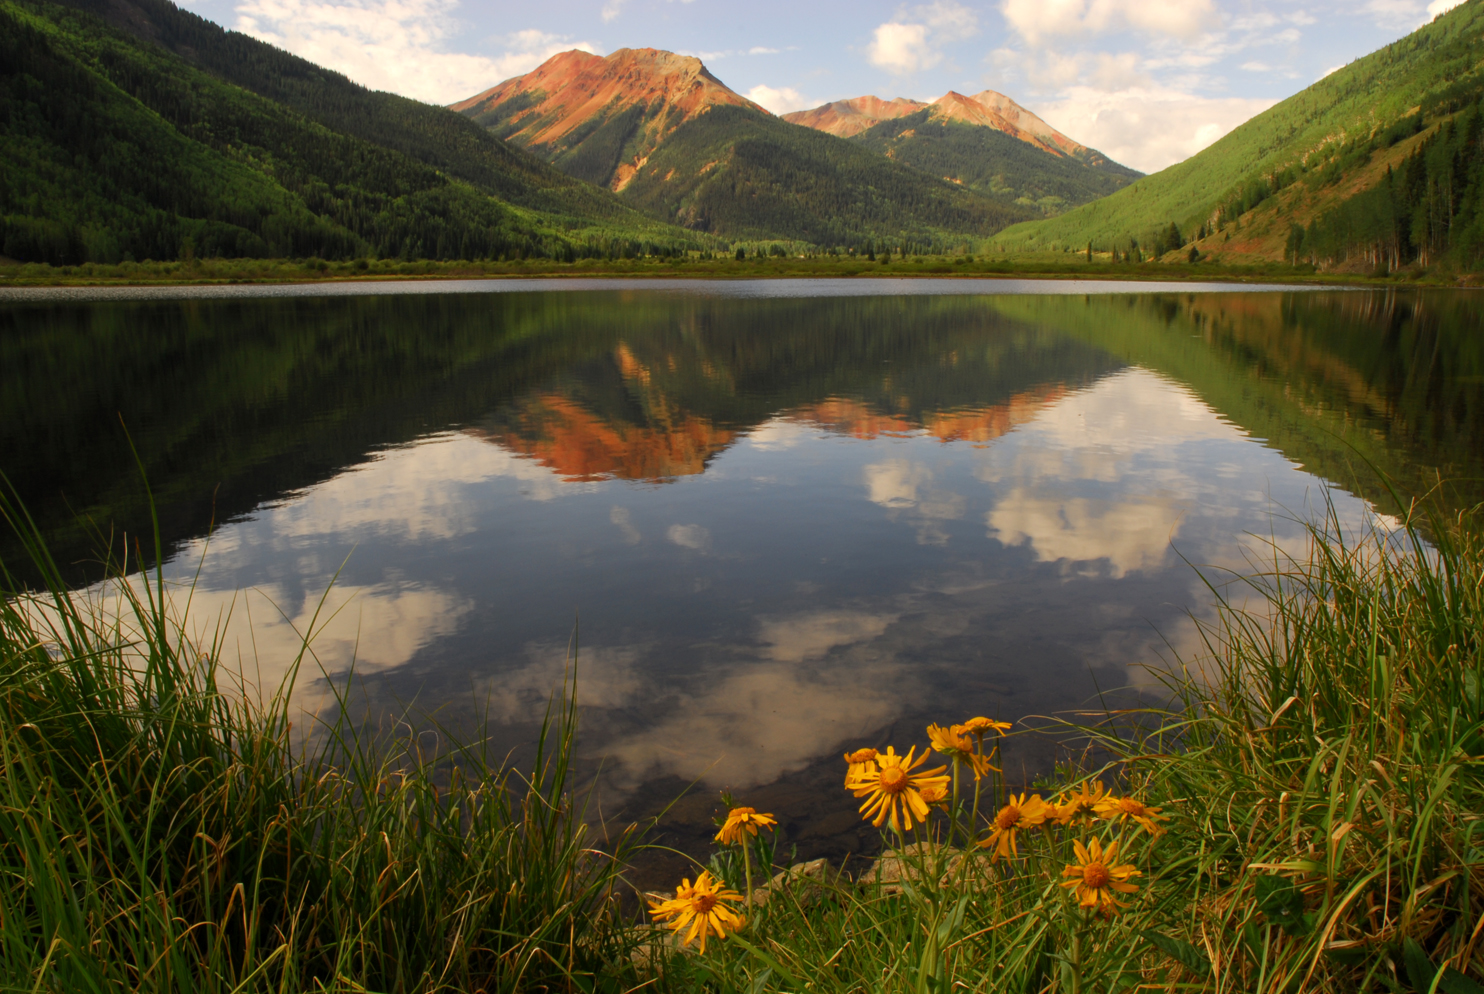 Alpine sunflowers, Red Mountains reflection  -  Crystal Lake, Uncompahgre National Forest, Colorado